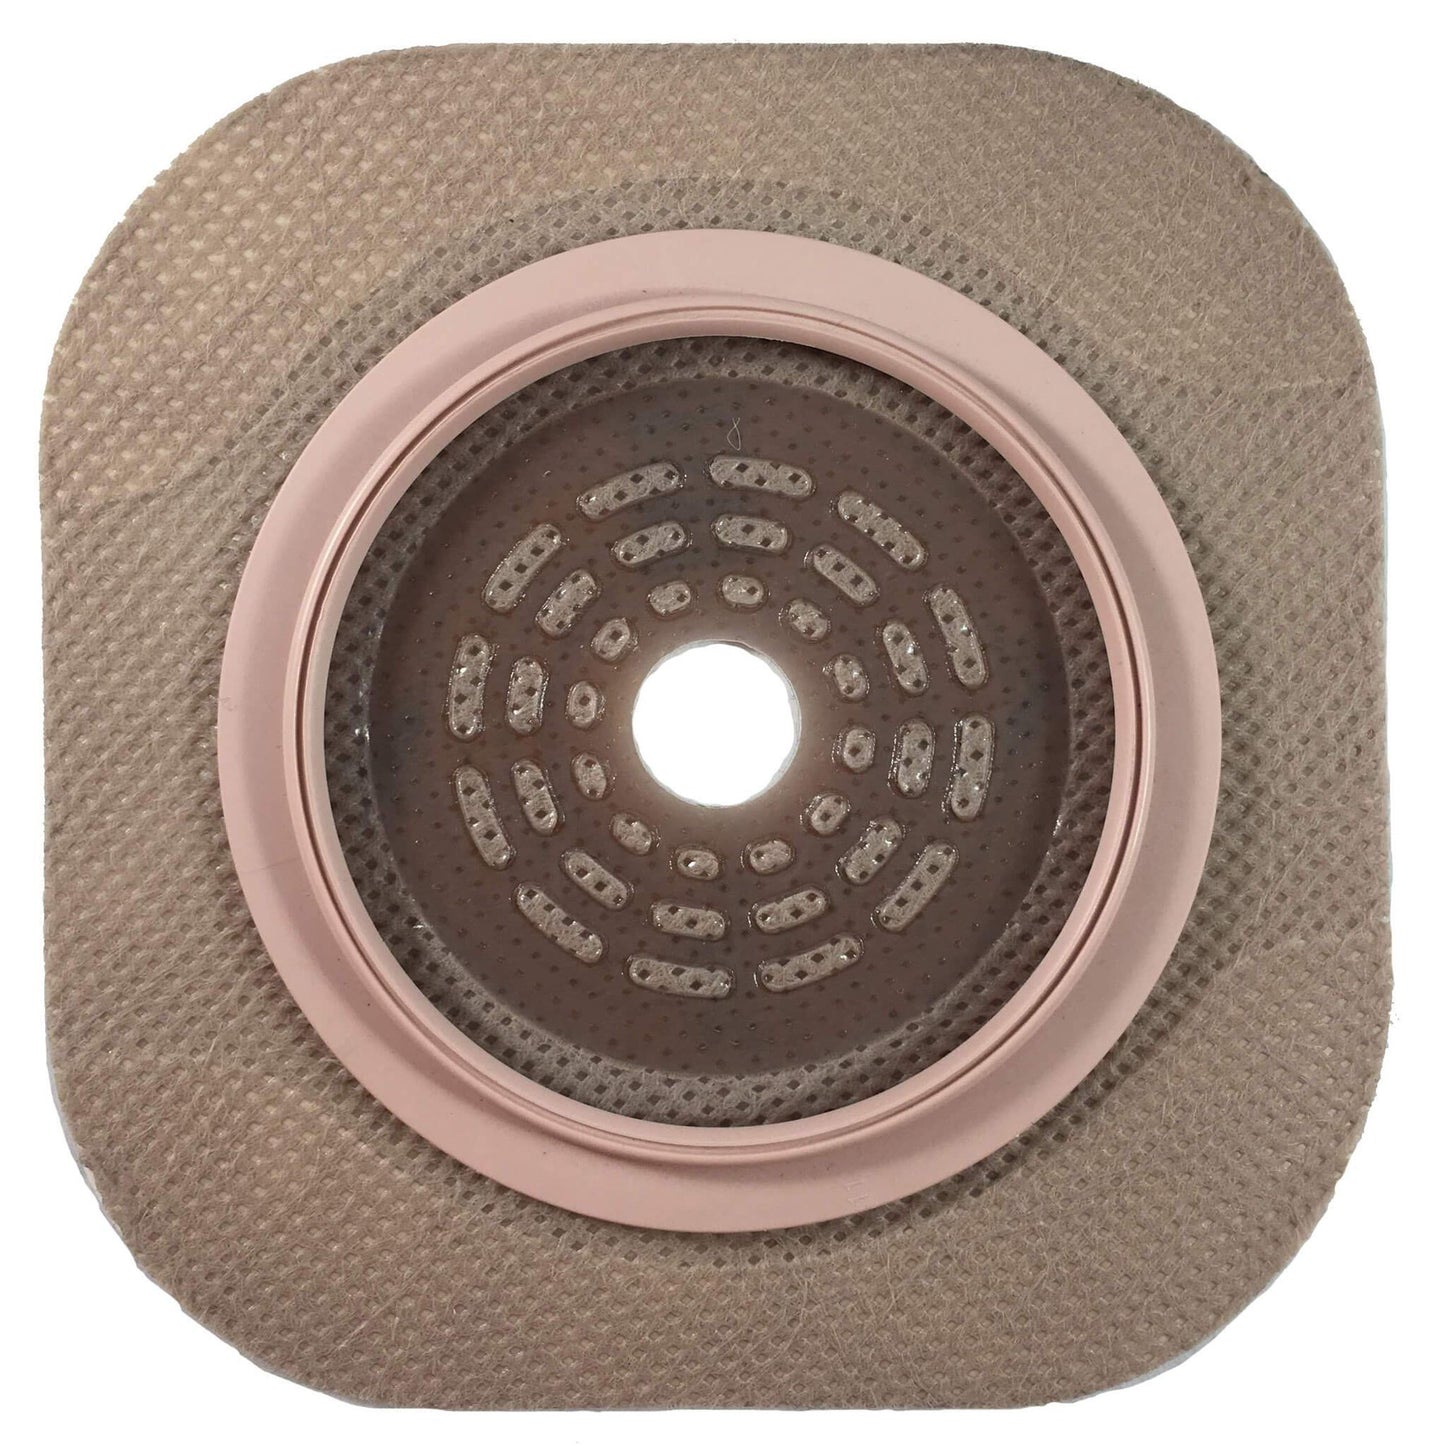 New Image™ Flextend™ Colostomy Barrier With Up to 1.25 Inch Stoma Opening, 5 ct